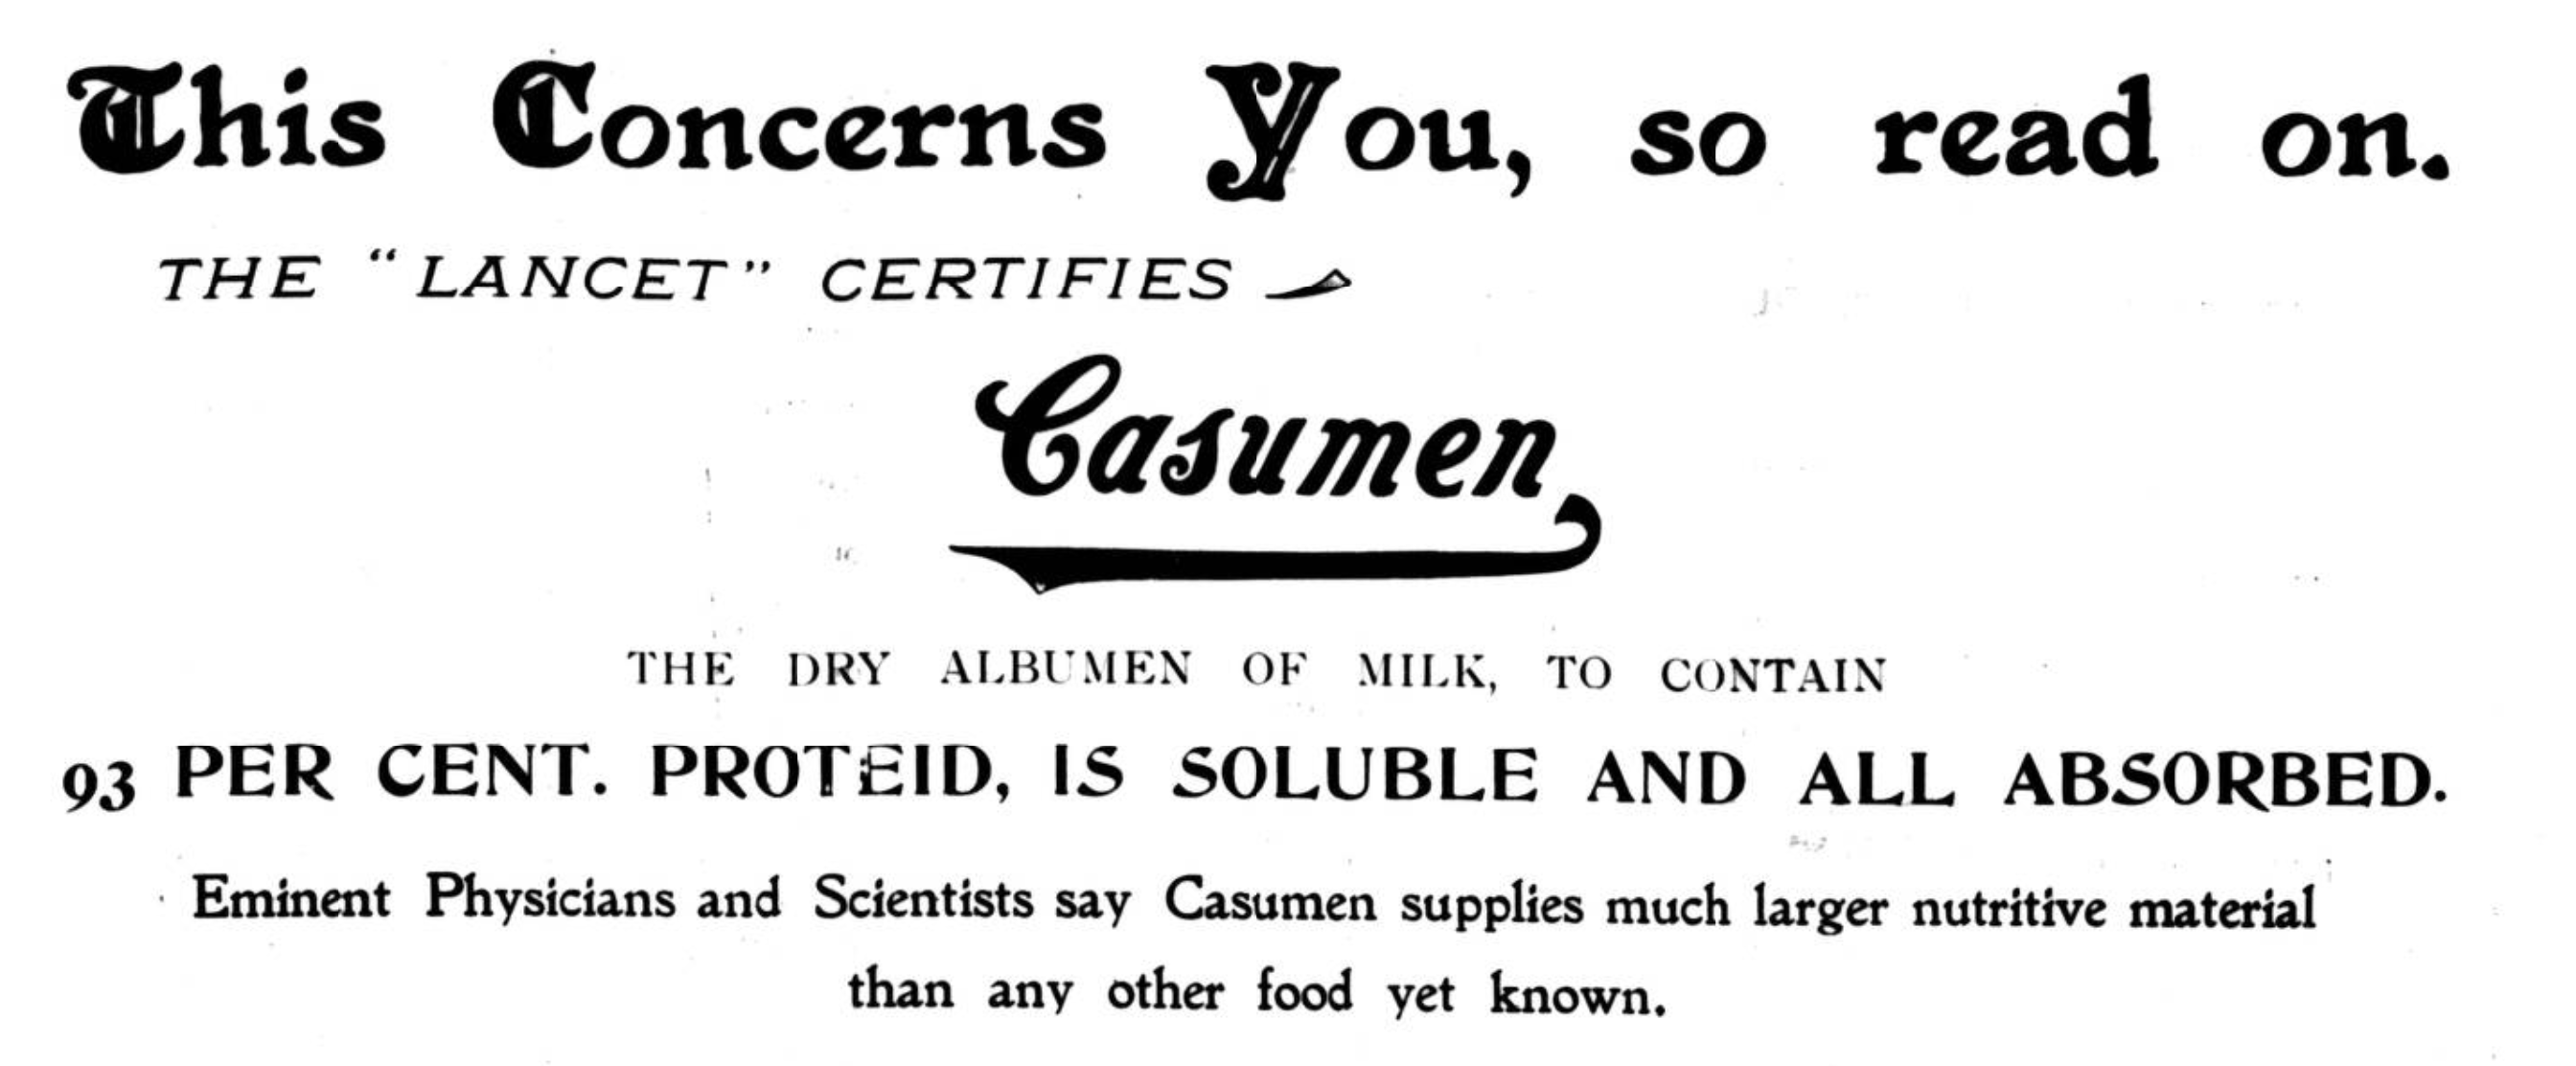 1902 advert for Casumen the dry albumen of milk which the advert states contains 93 per cent. proteid and provides much large nutritive material than any other food yet known